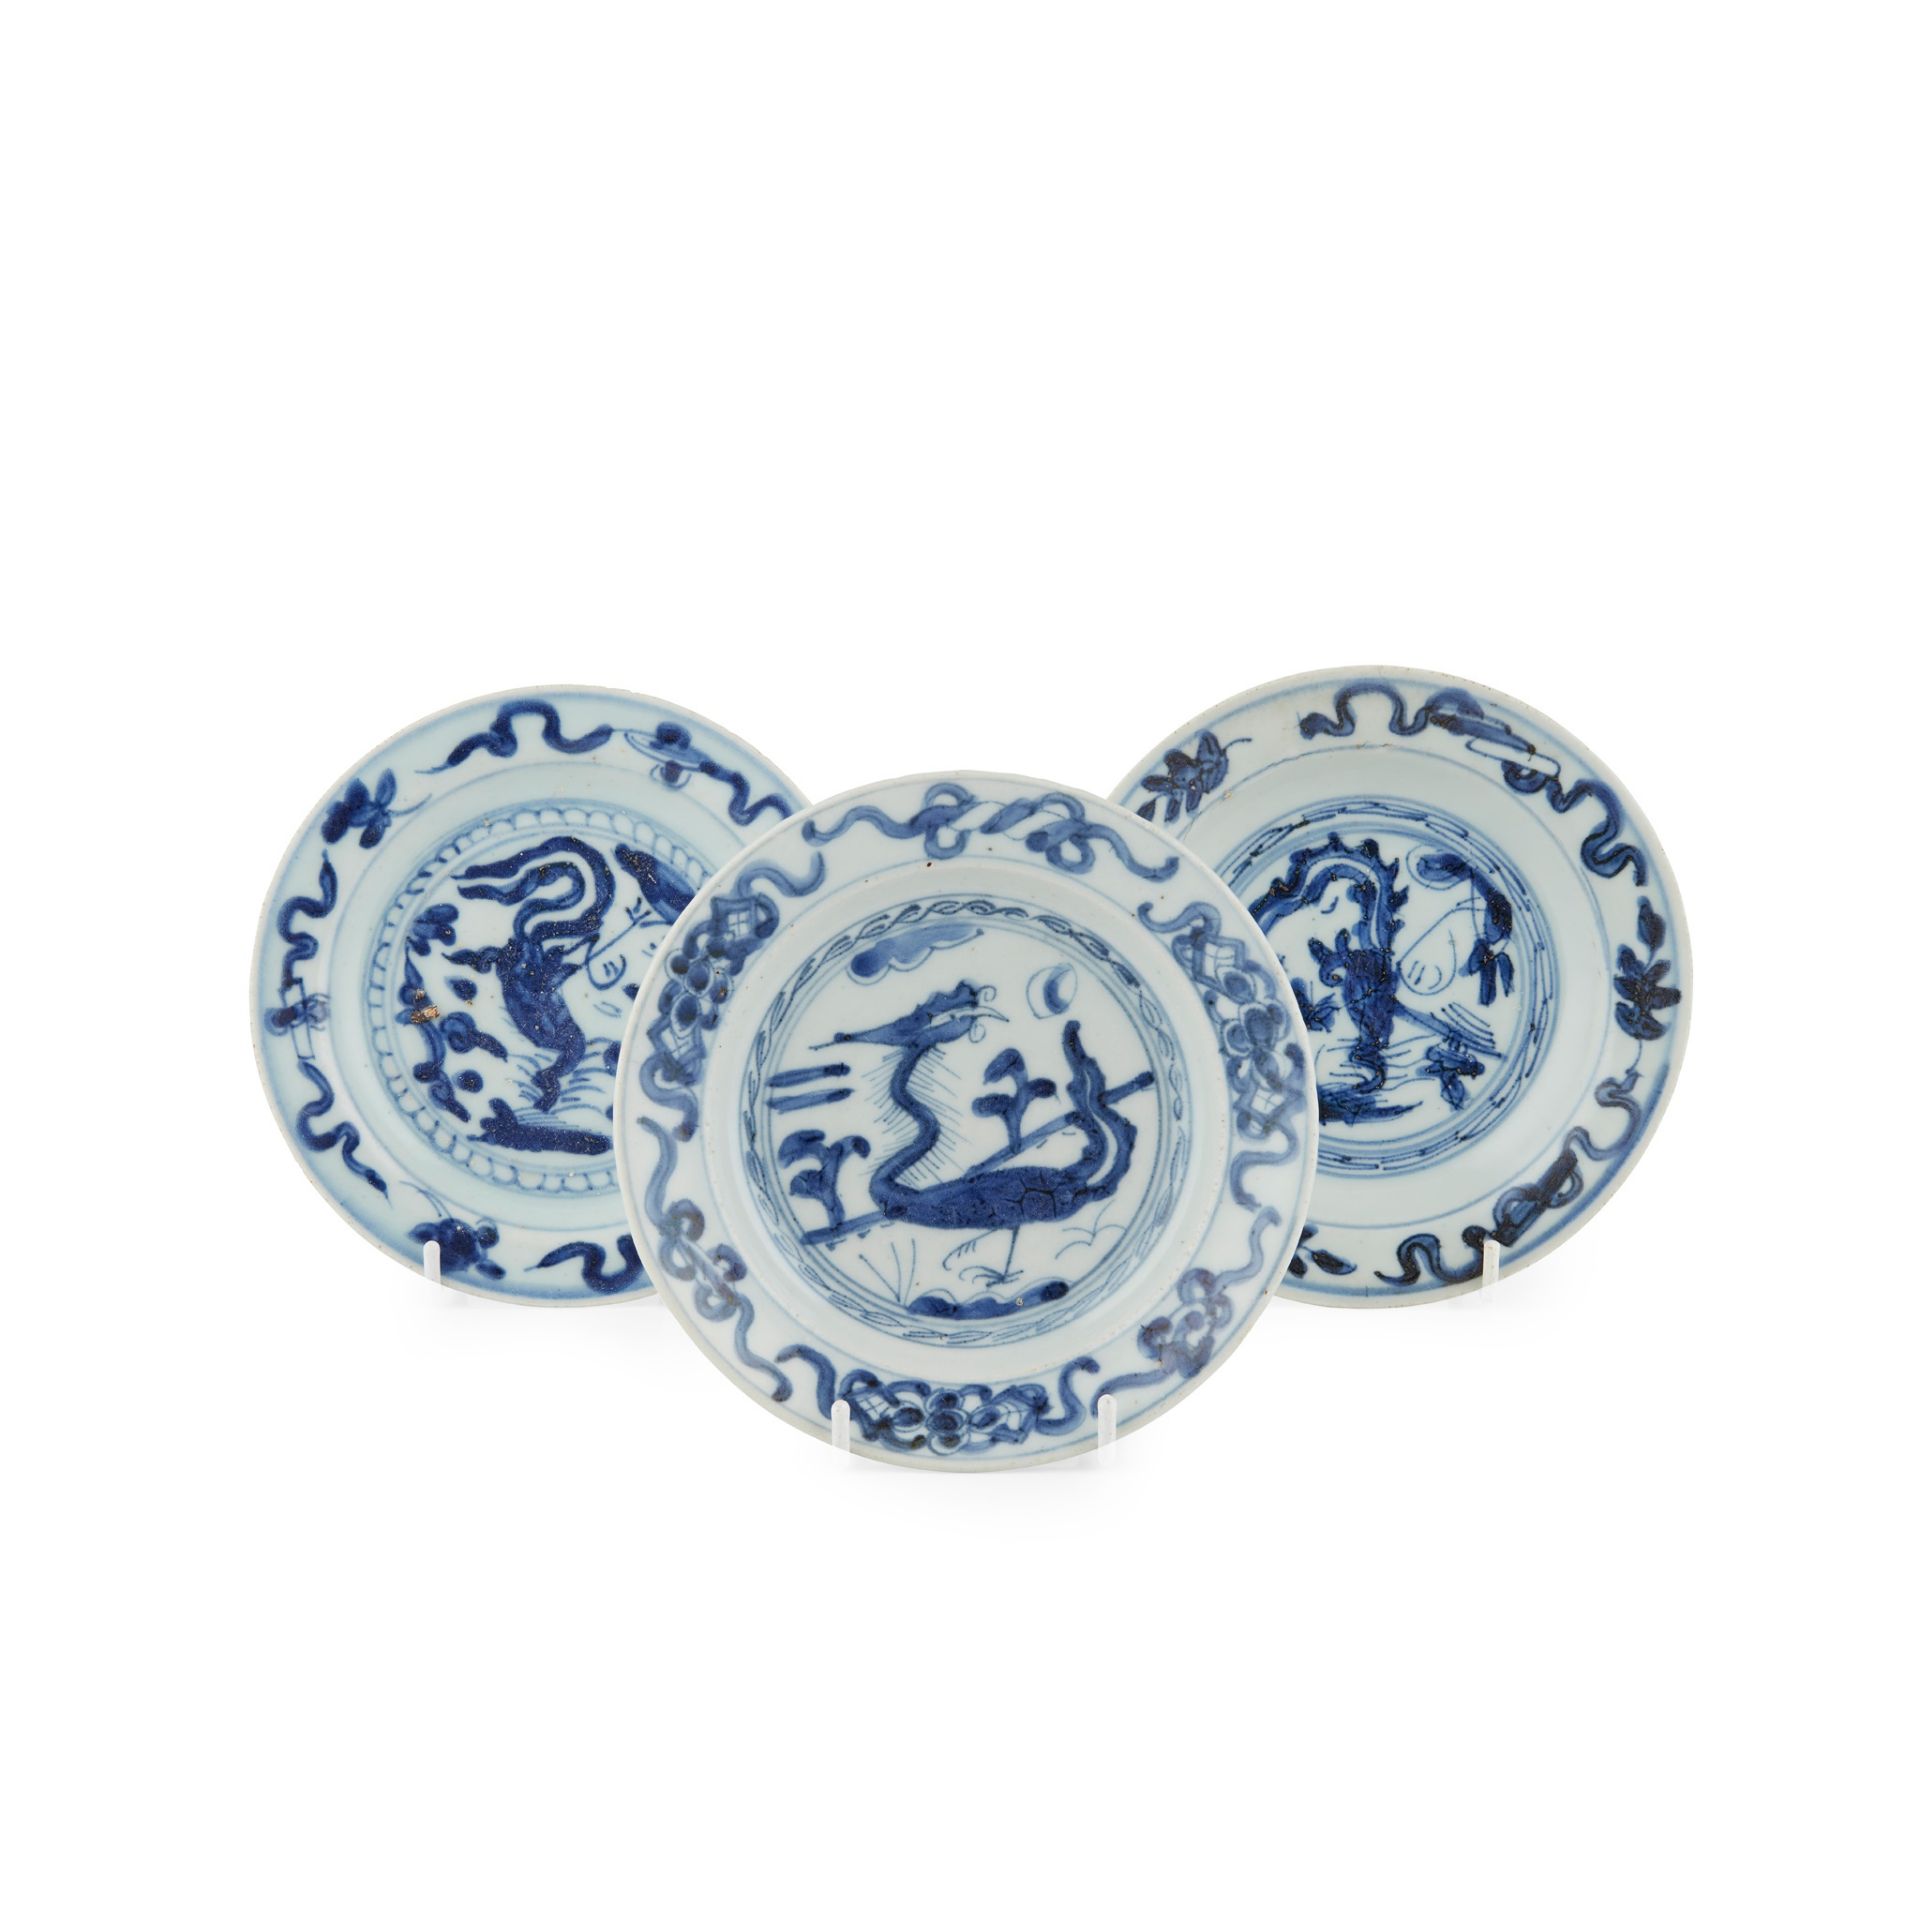 GROUP OF THREE BLUE AND WHITE 'PHEONIX' DISHES MING DYNASTY